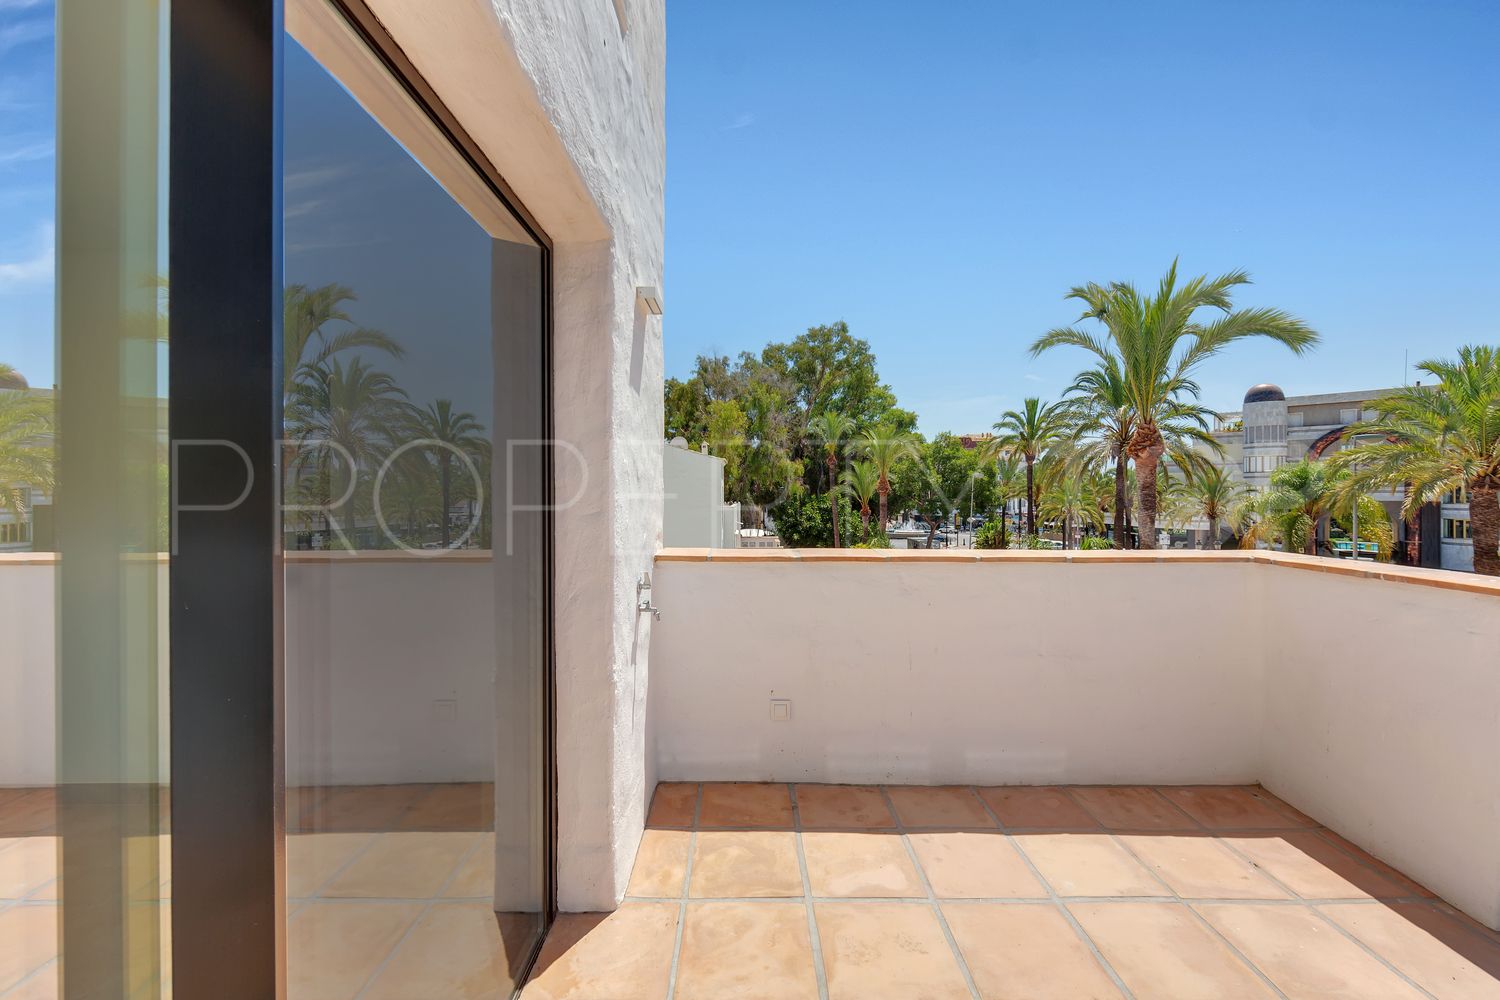 Apartment with 1 bedroom for sale in Marbella - Puerto Banus